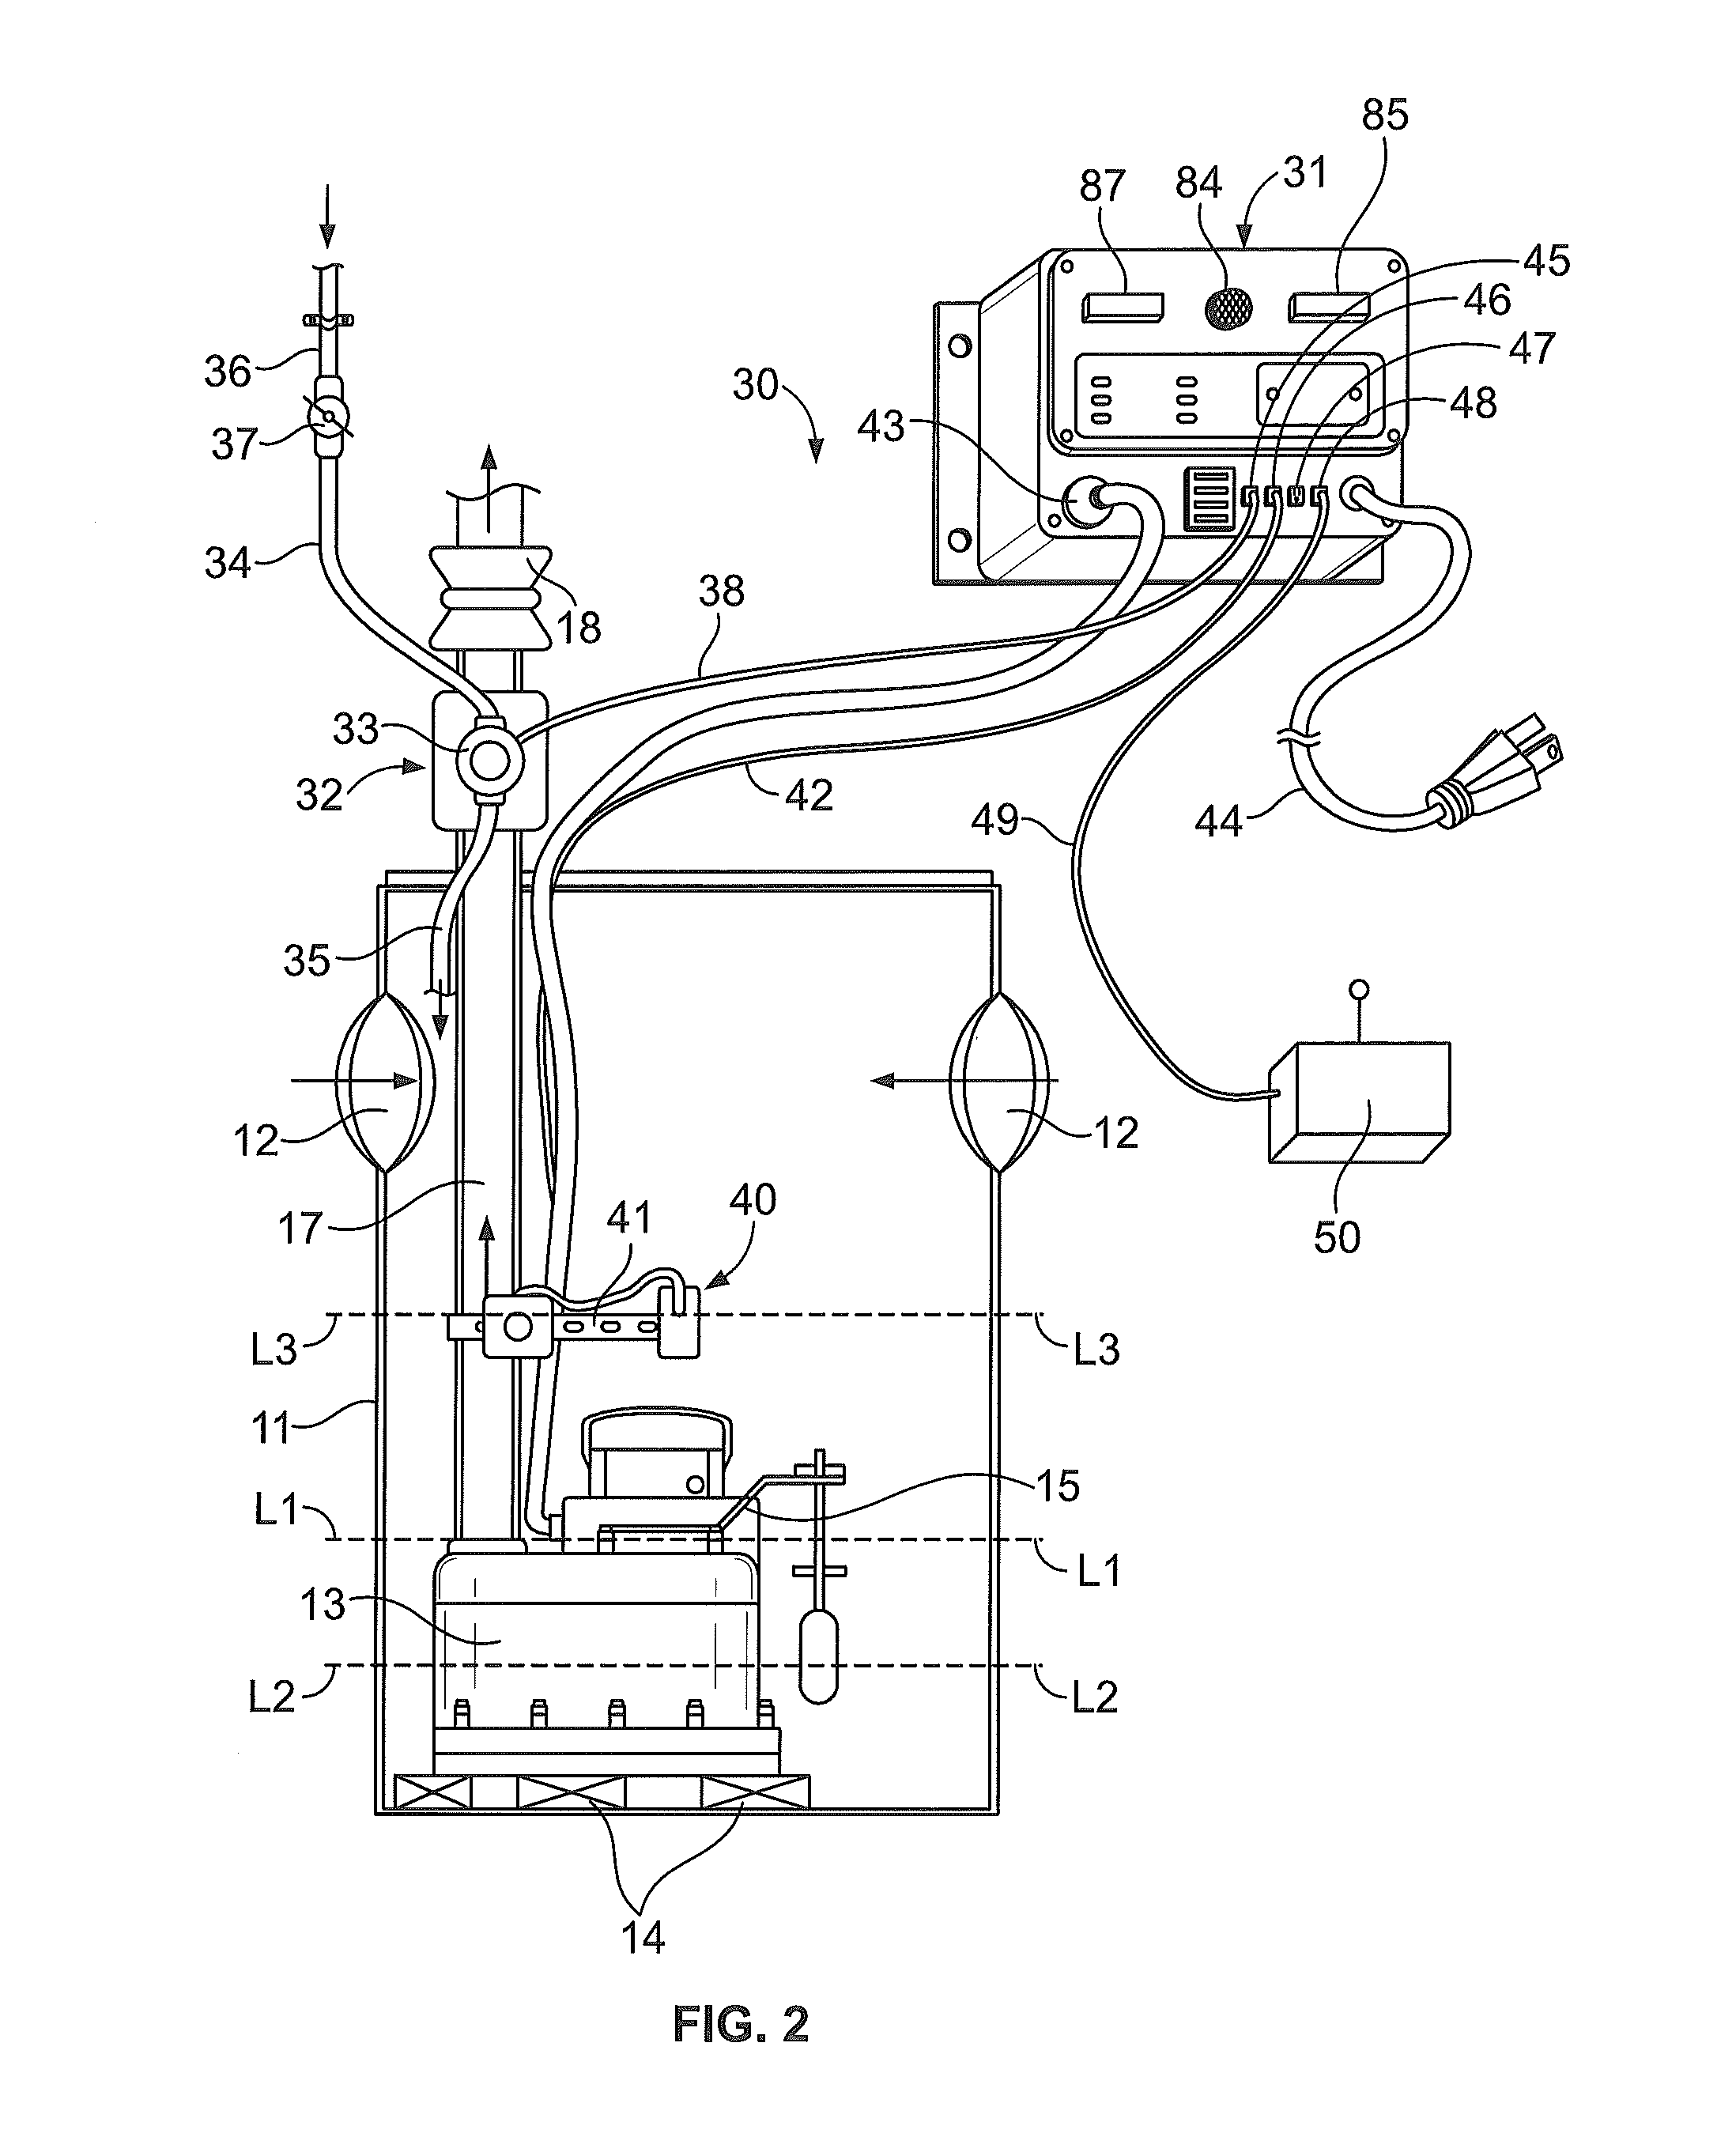 Battery-powered backup power system for a sump pump installation